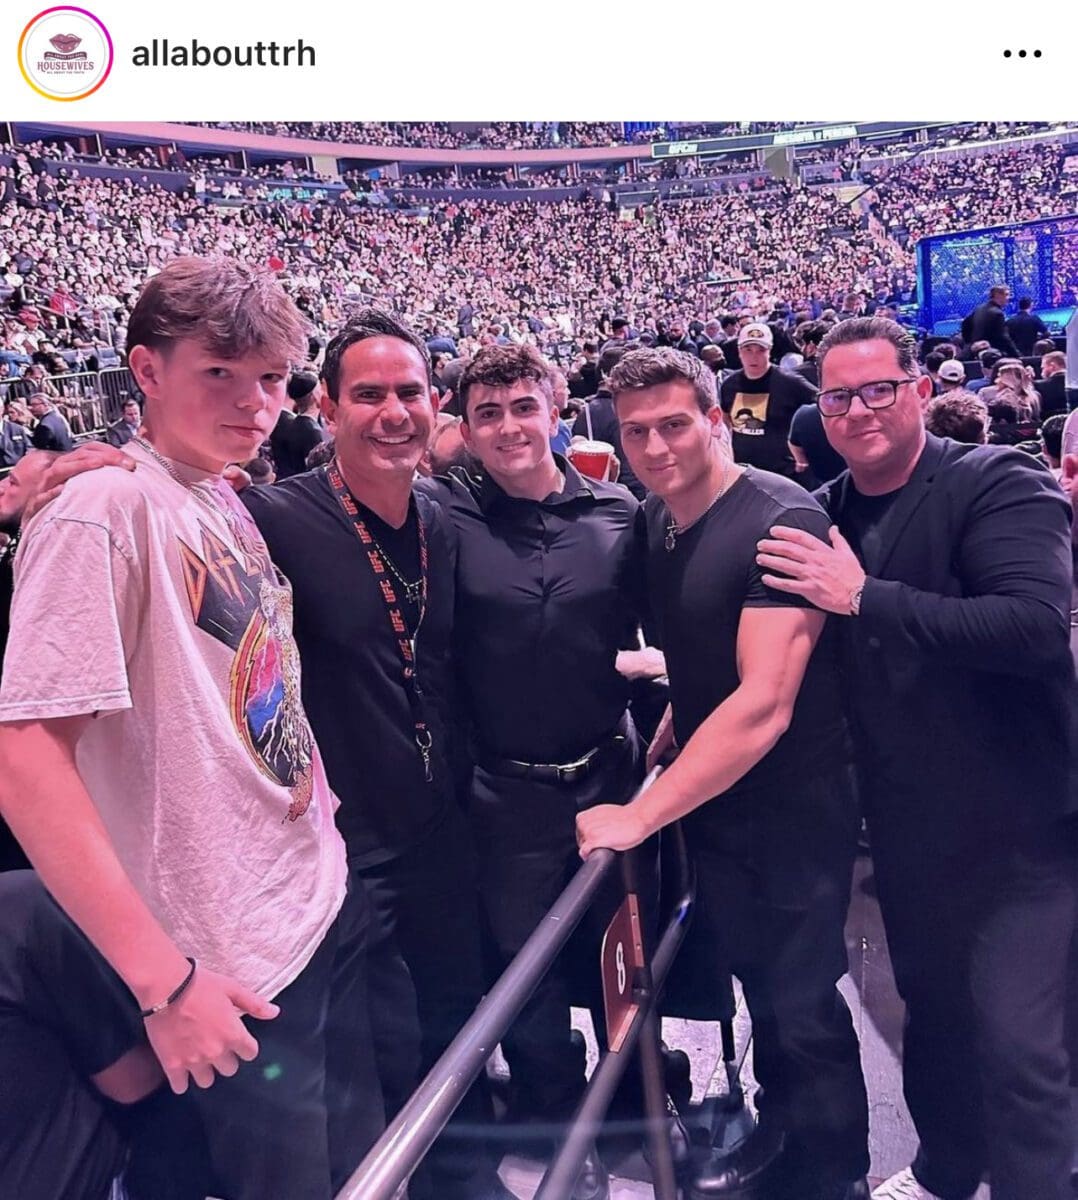 Louie Ruelas and his son, Louie Jr, attend concert with Frankie Catania and Paulie Connell.